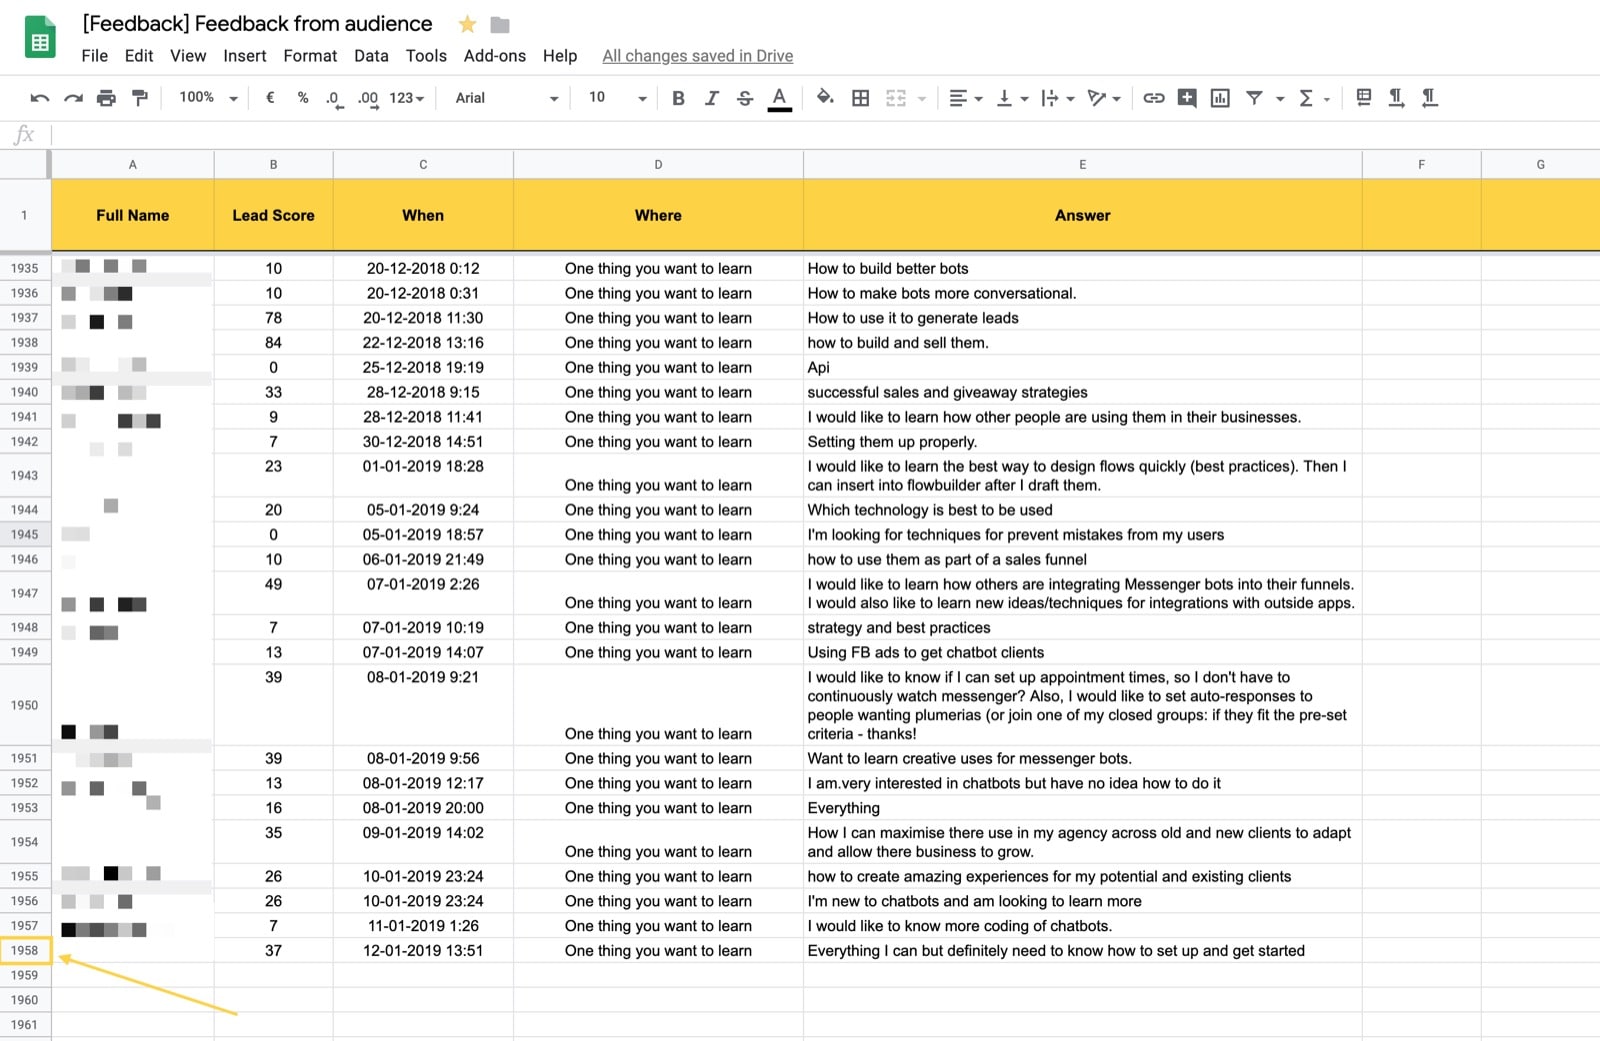 Google Sheet with feedback from subscribers